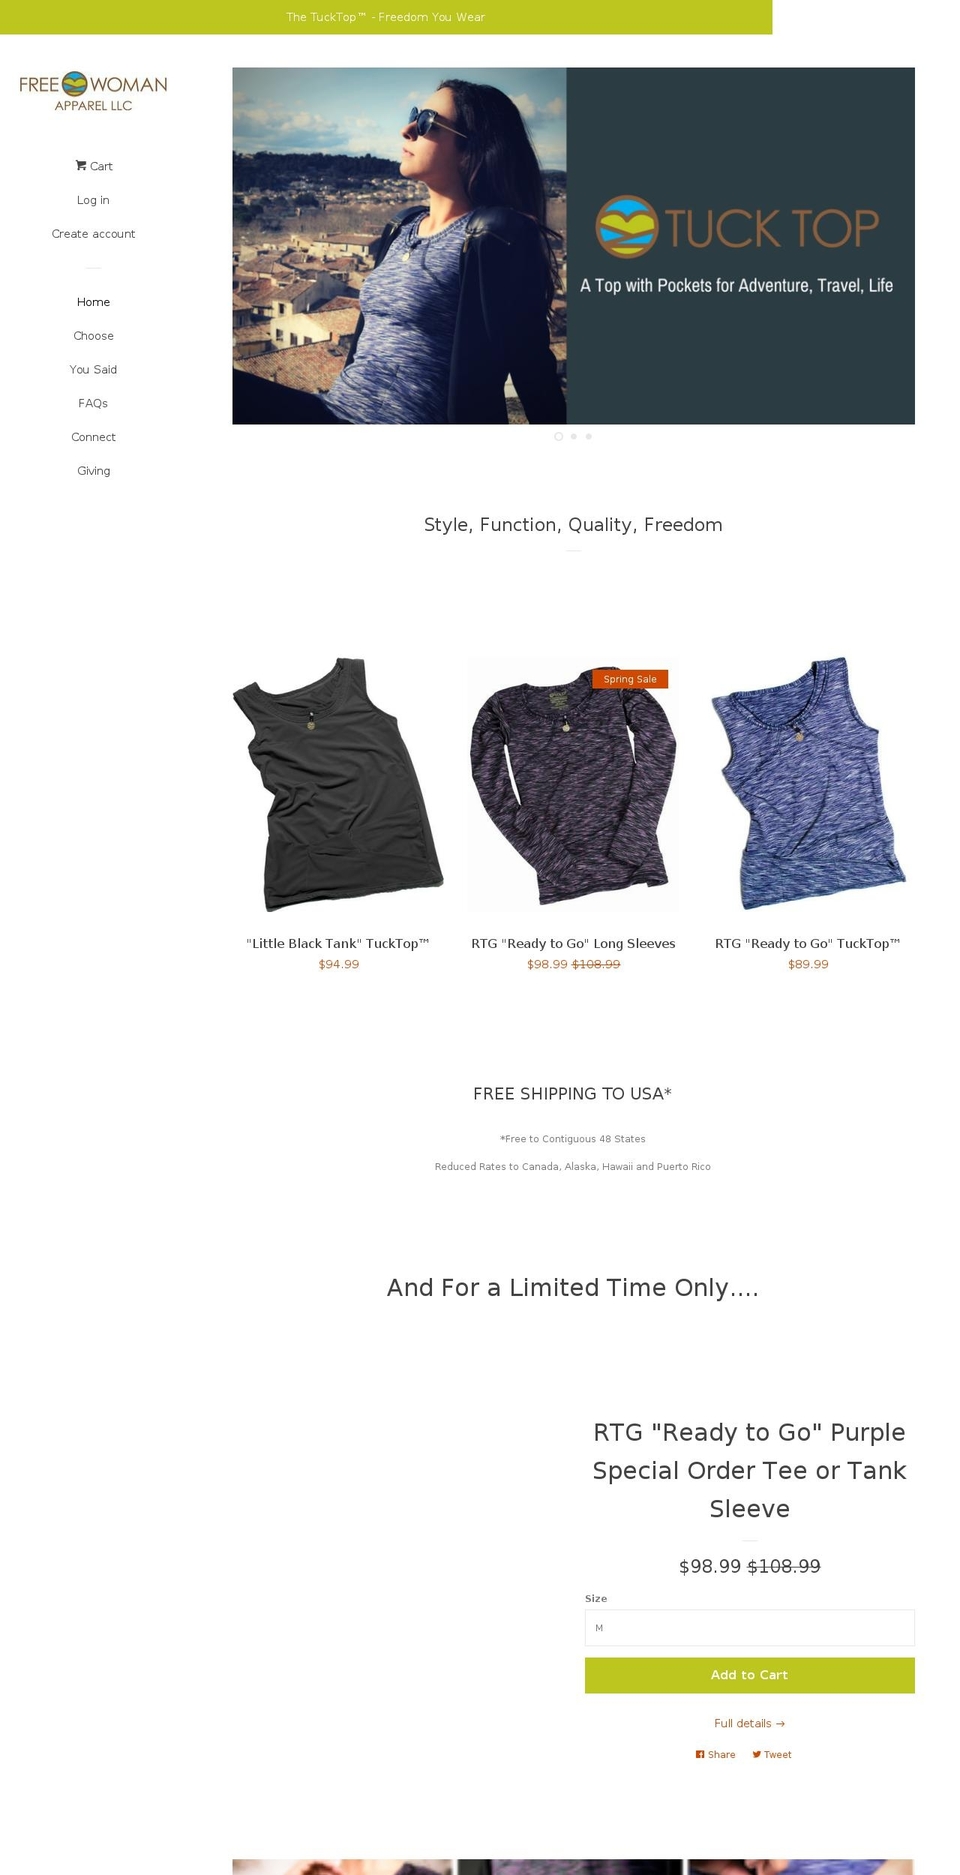 Copy of Pop Shopify theme site example freewomanapparel.com